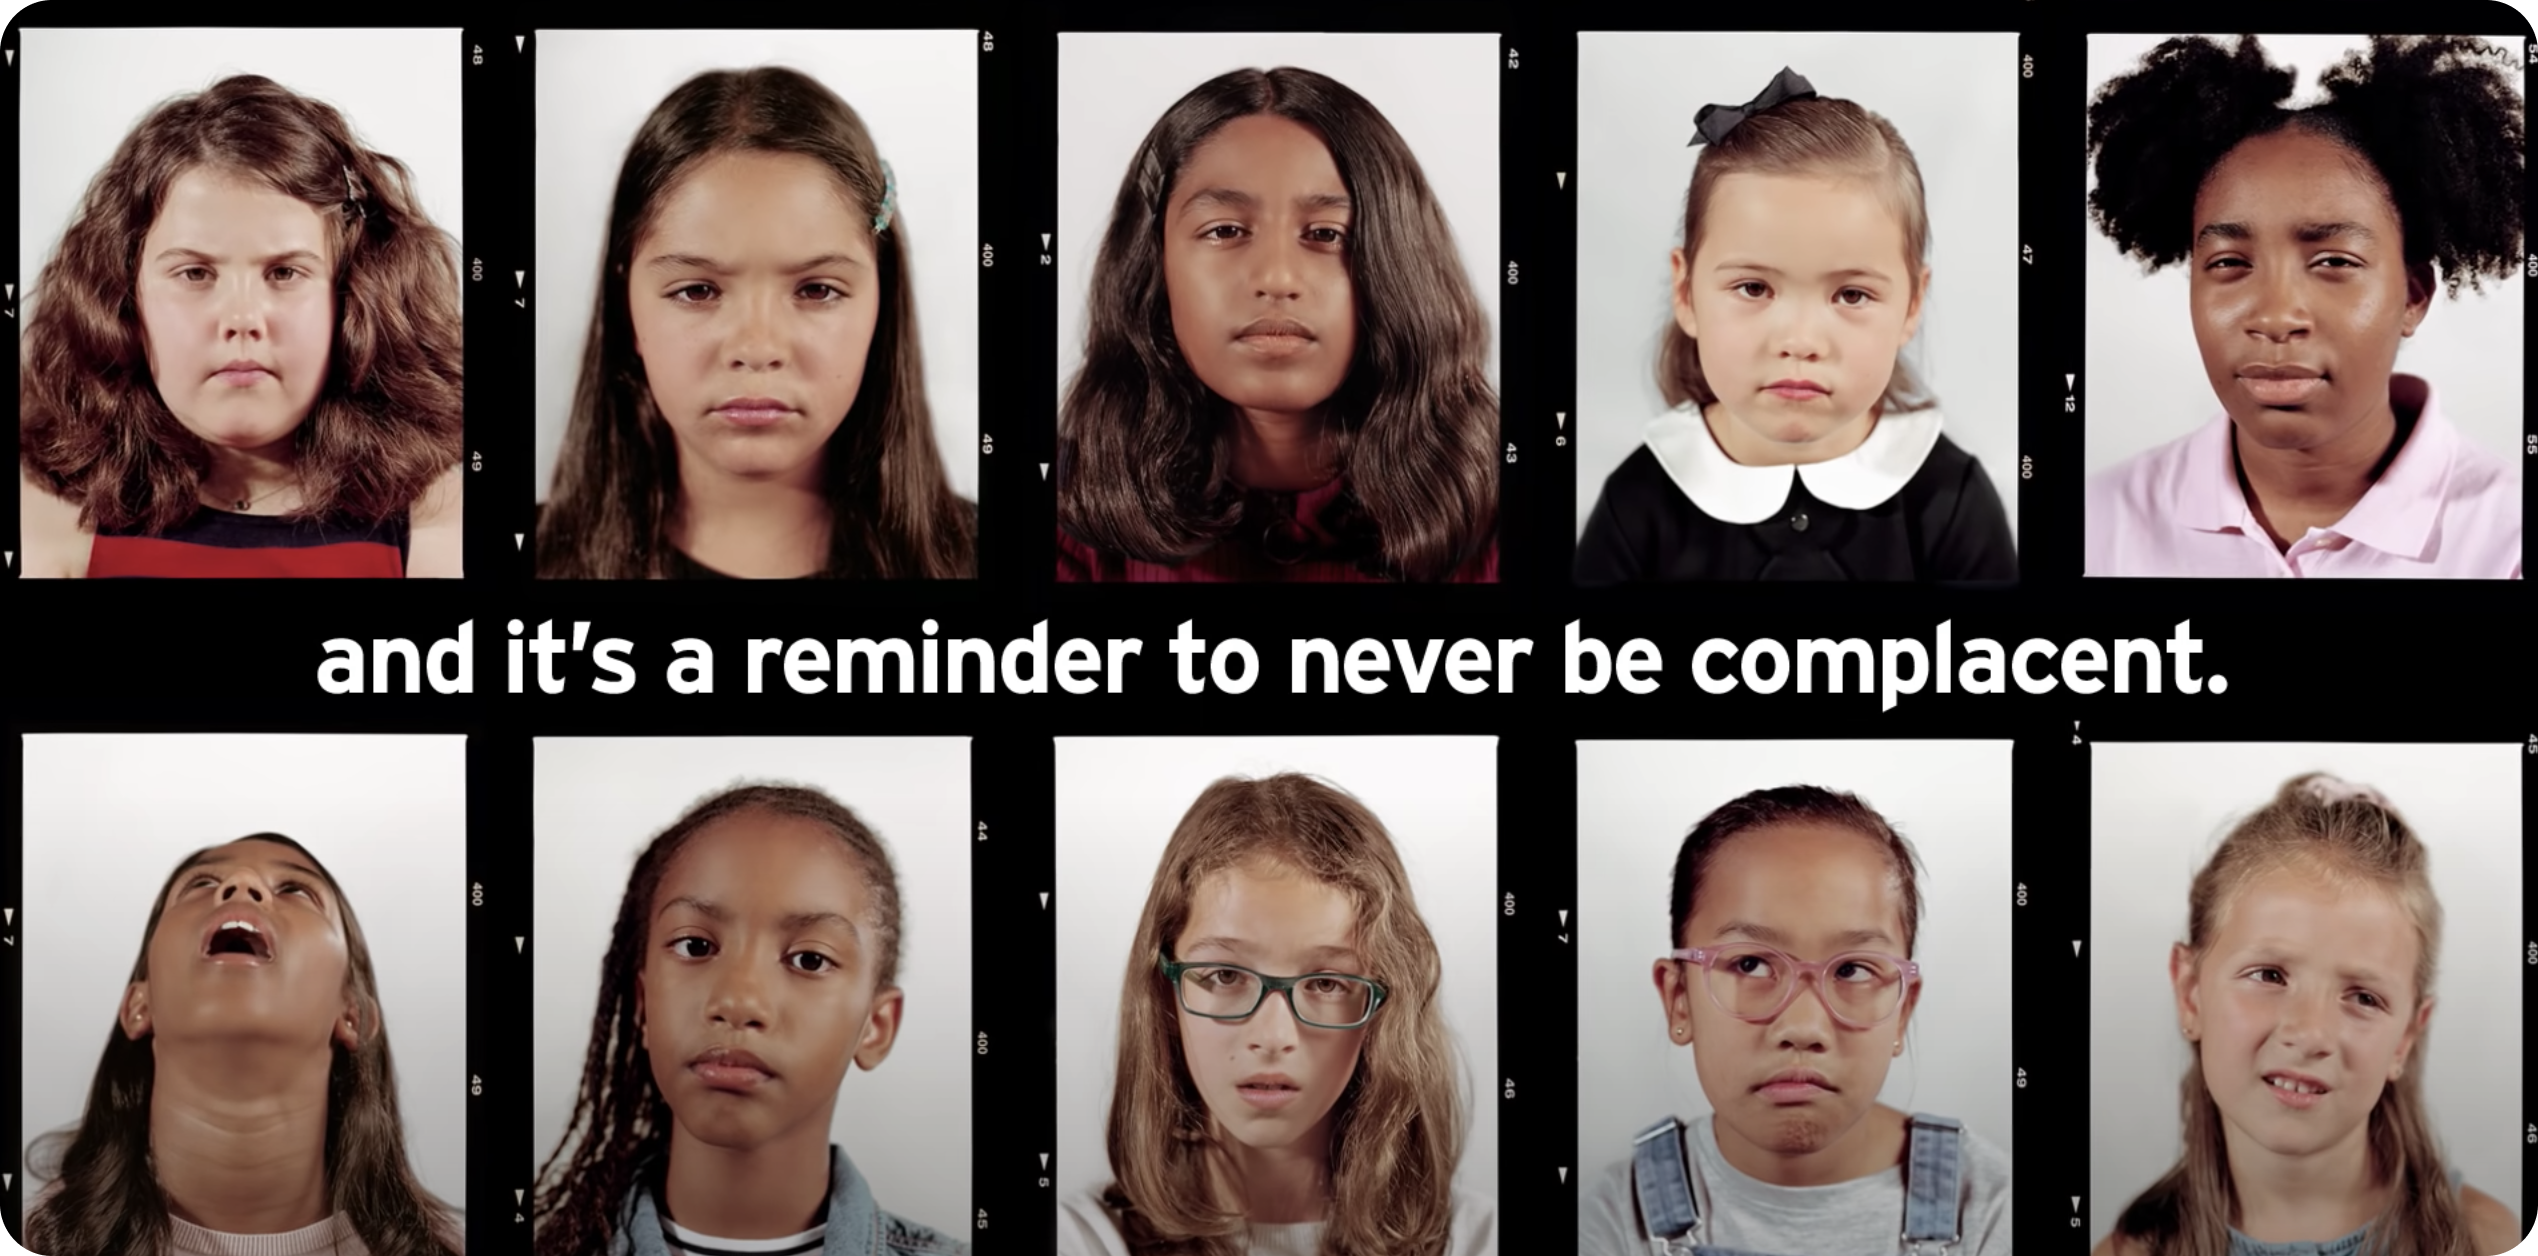 A screengrab from Citibank's The Moment #itsabouttime video on YouTube, showing eight young girls' faces expressing different emotions. The text in the middle reads, "We should all feel this way."